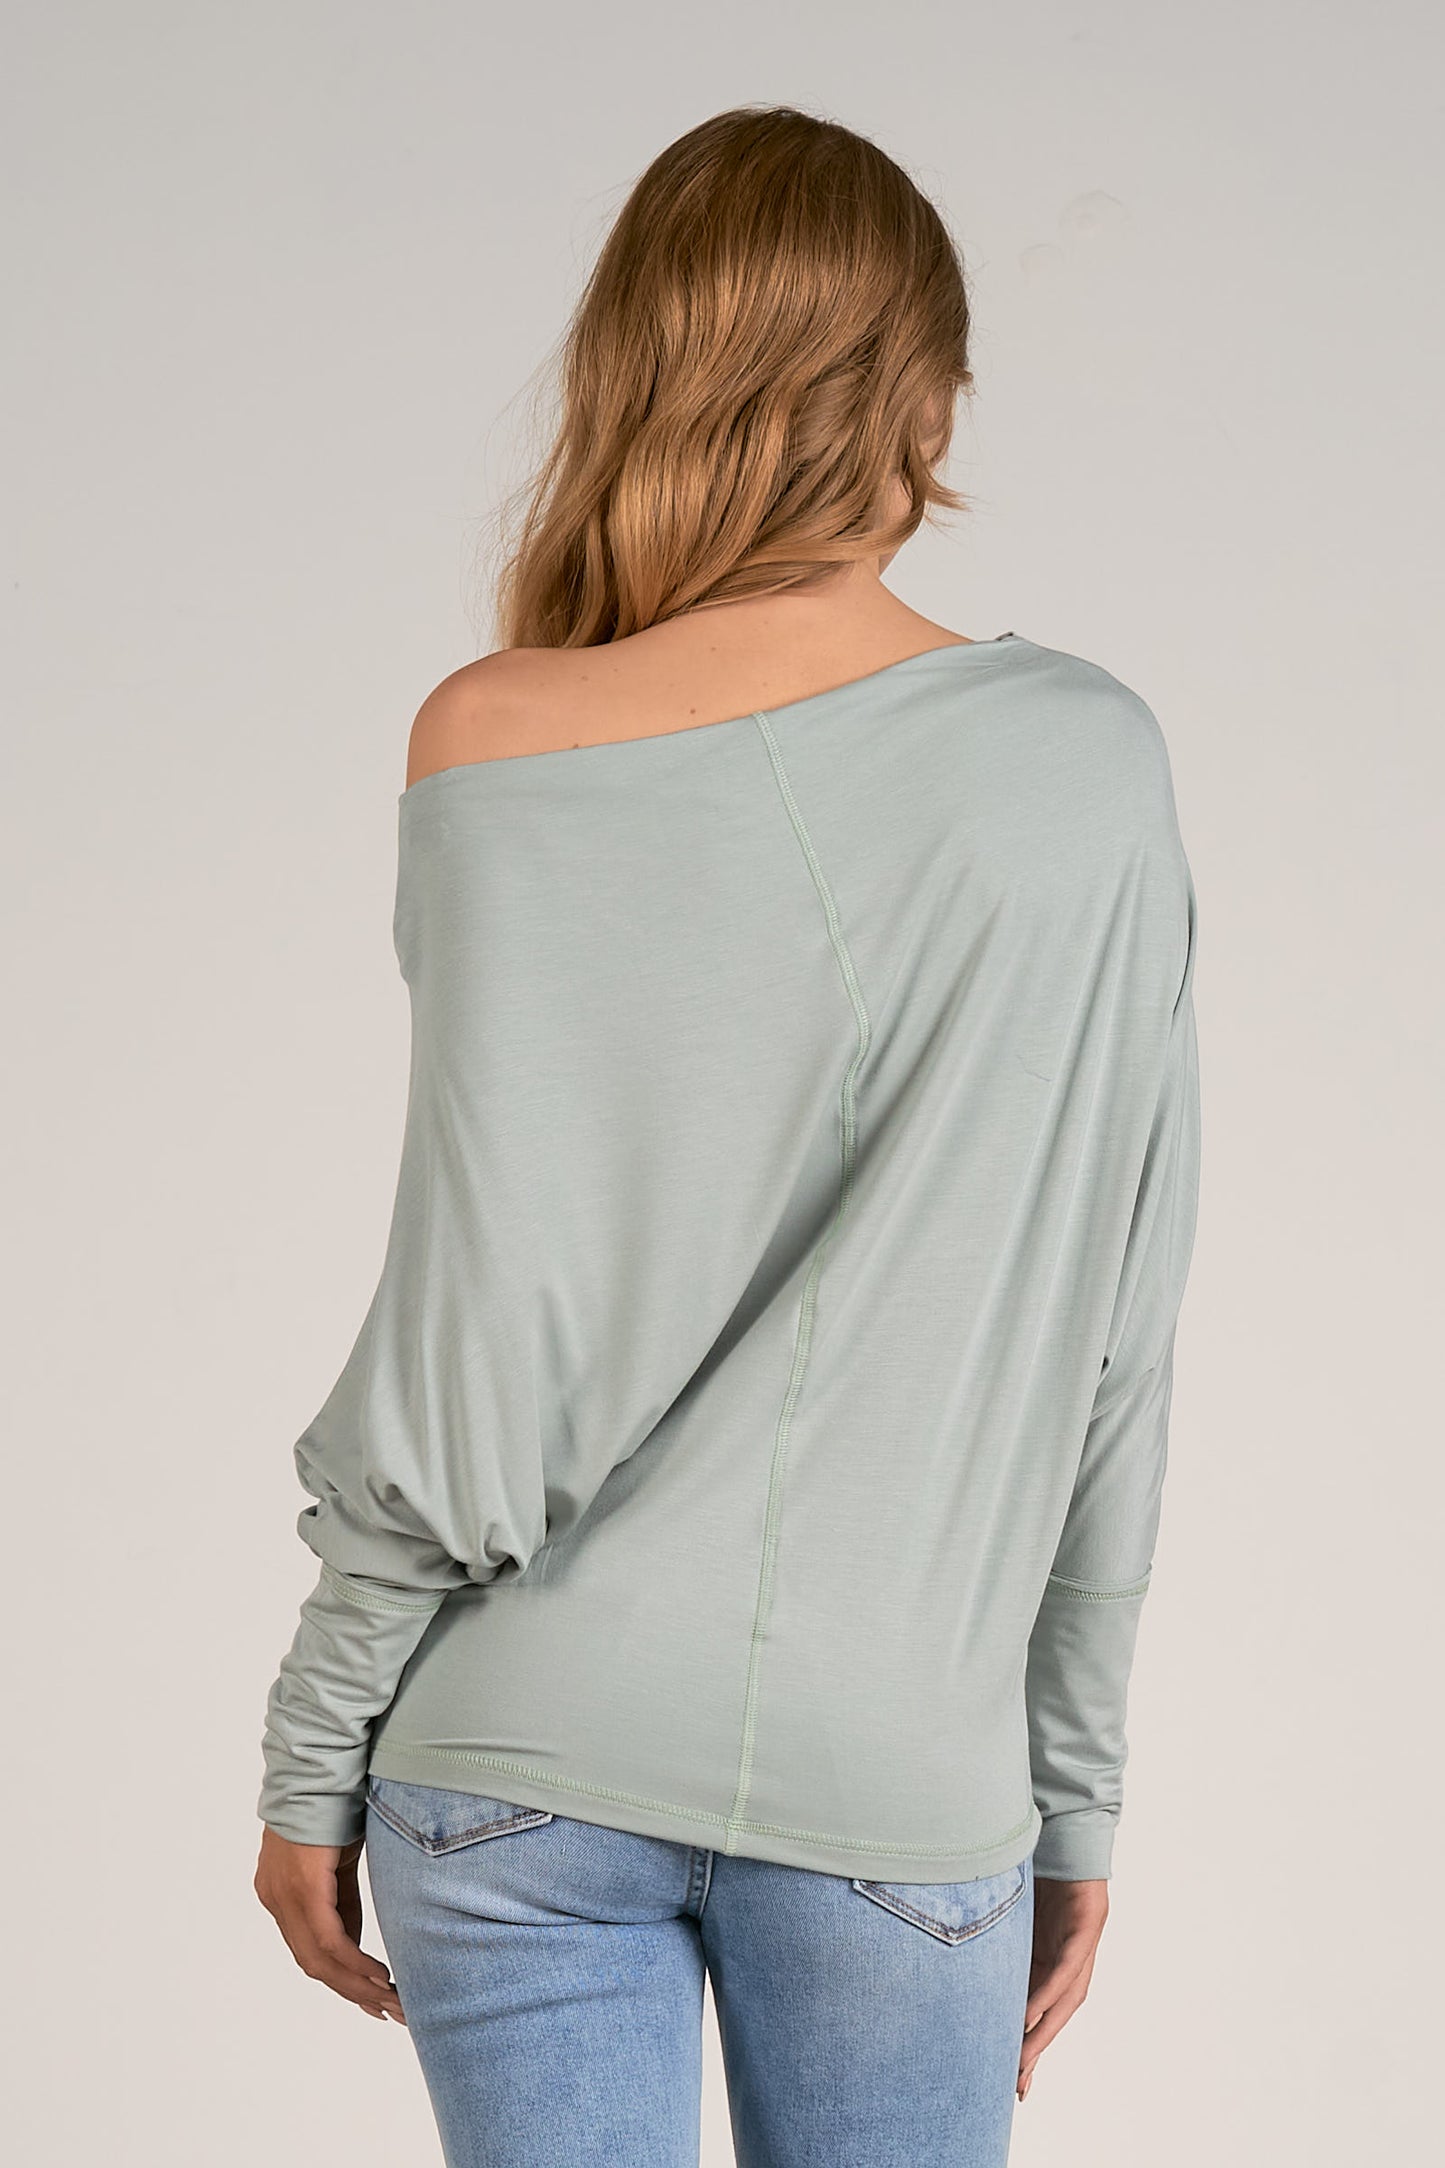 Comfy One Size Fits Most, Gorgeous Shirt